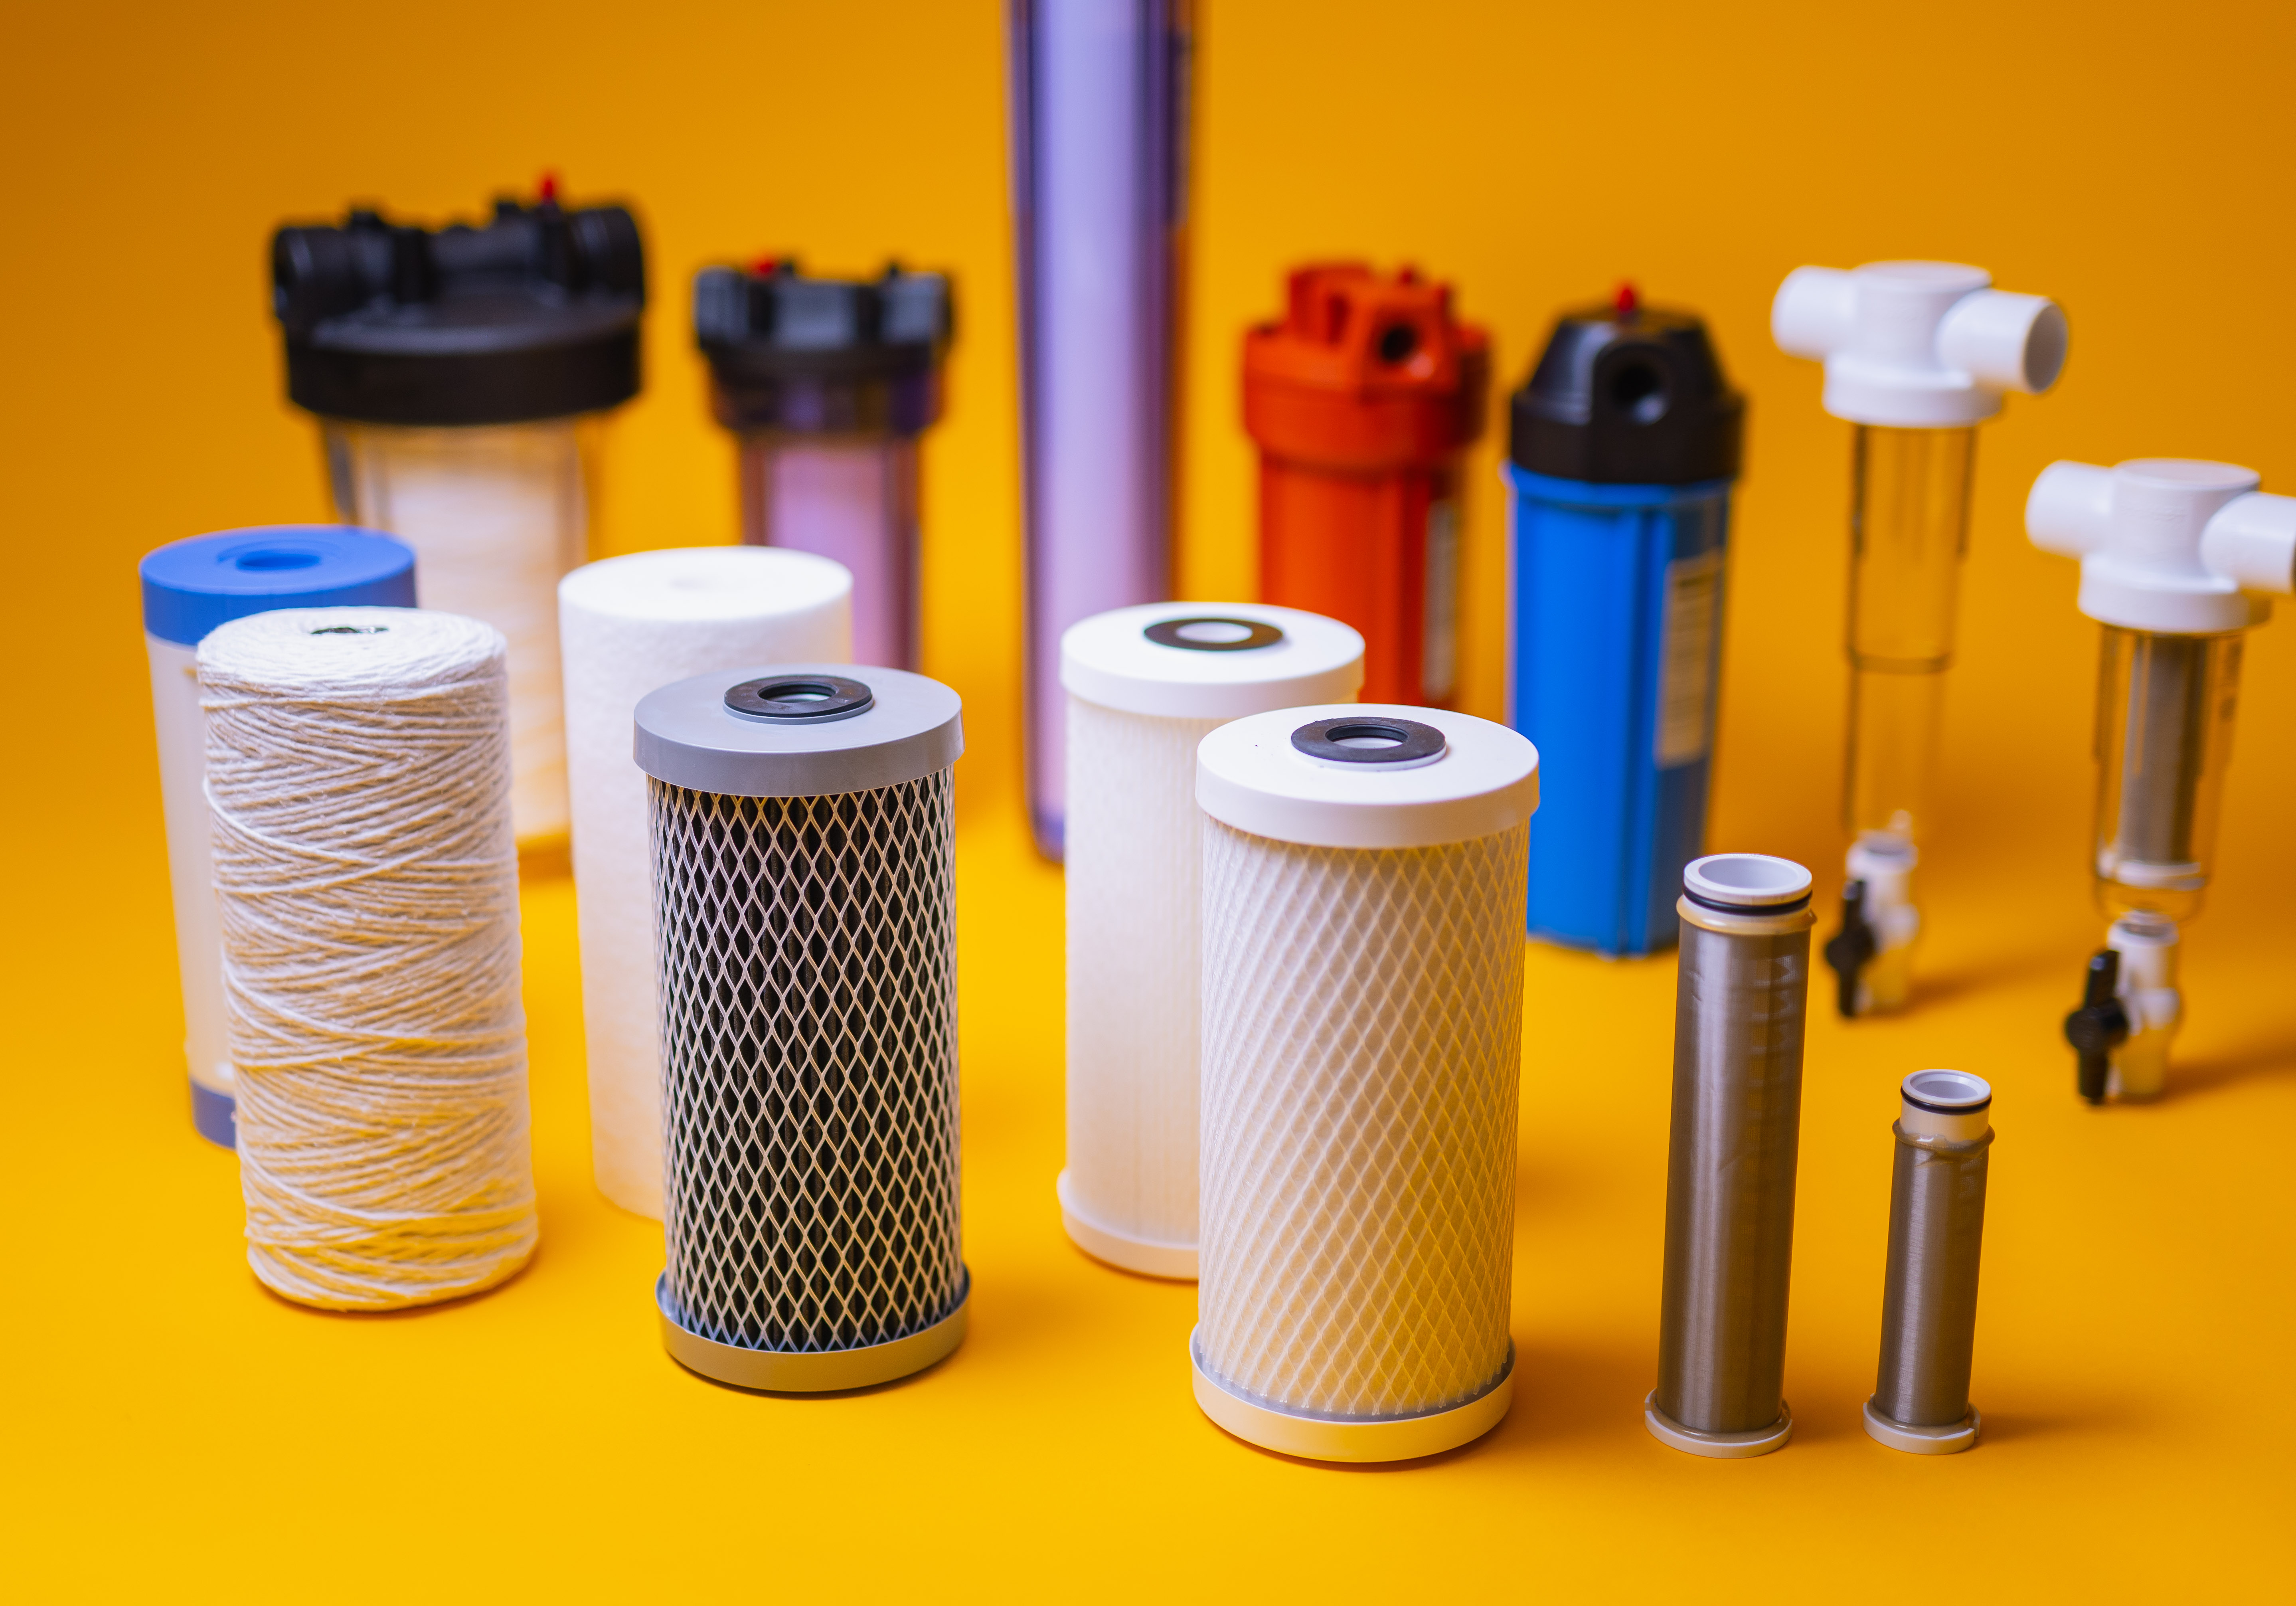 Why are Some Filter Cartridges Different Lengths?